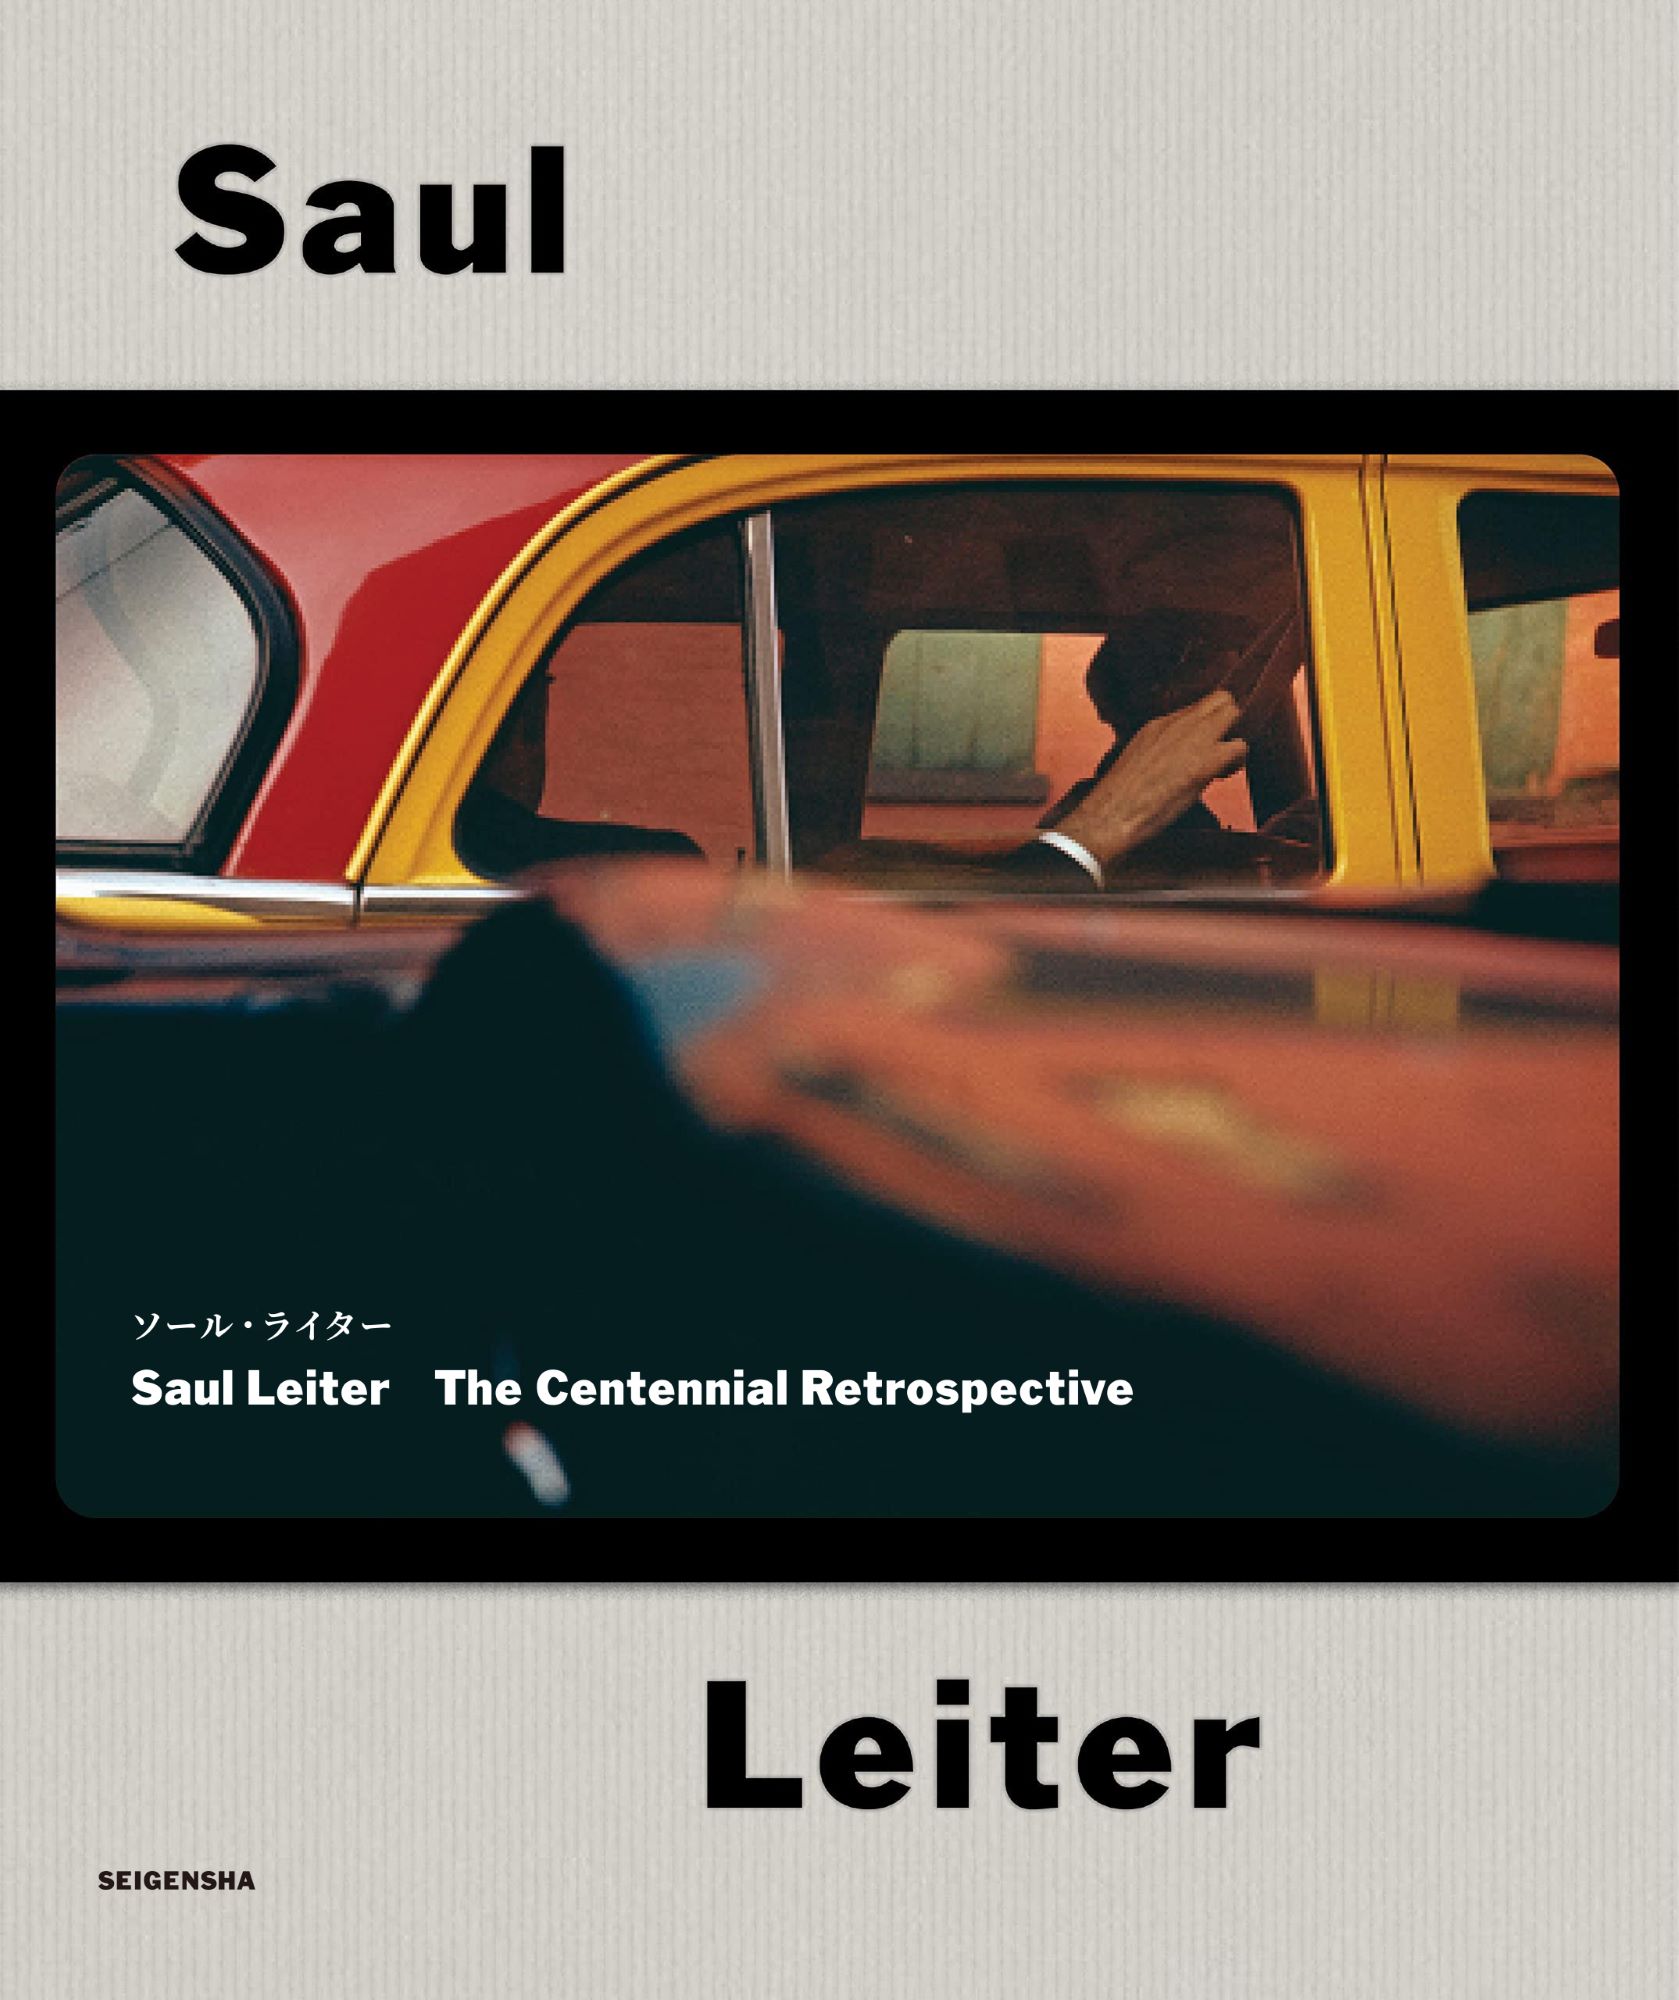 Saul Leiter ソールライター Early Color 仏語版仏語版 - 洋書